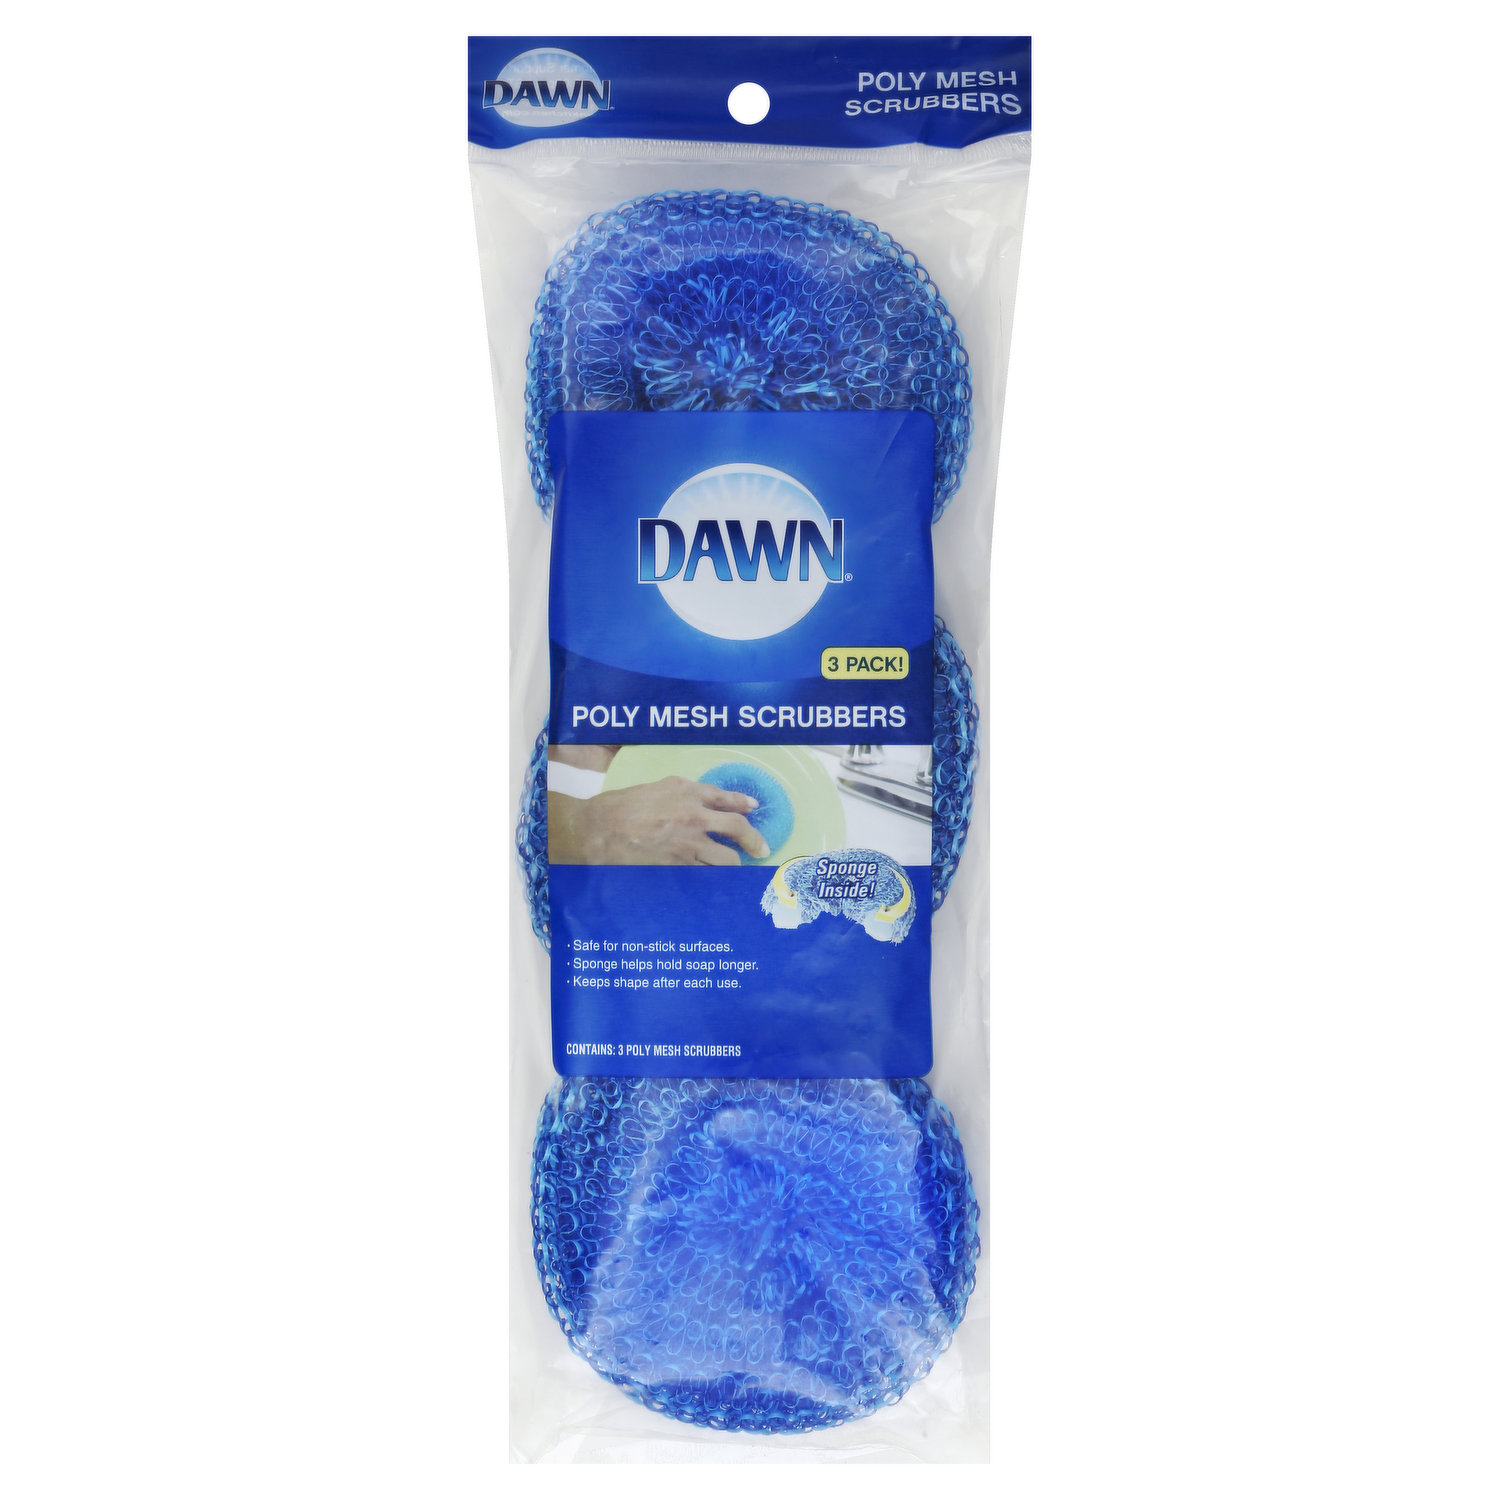 Dawn Dishwand with Refills, 1 ct - Fred Meyer